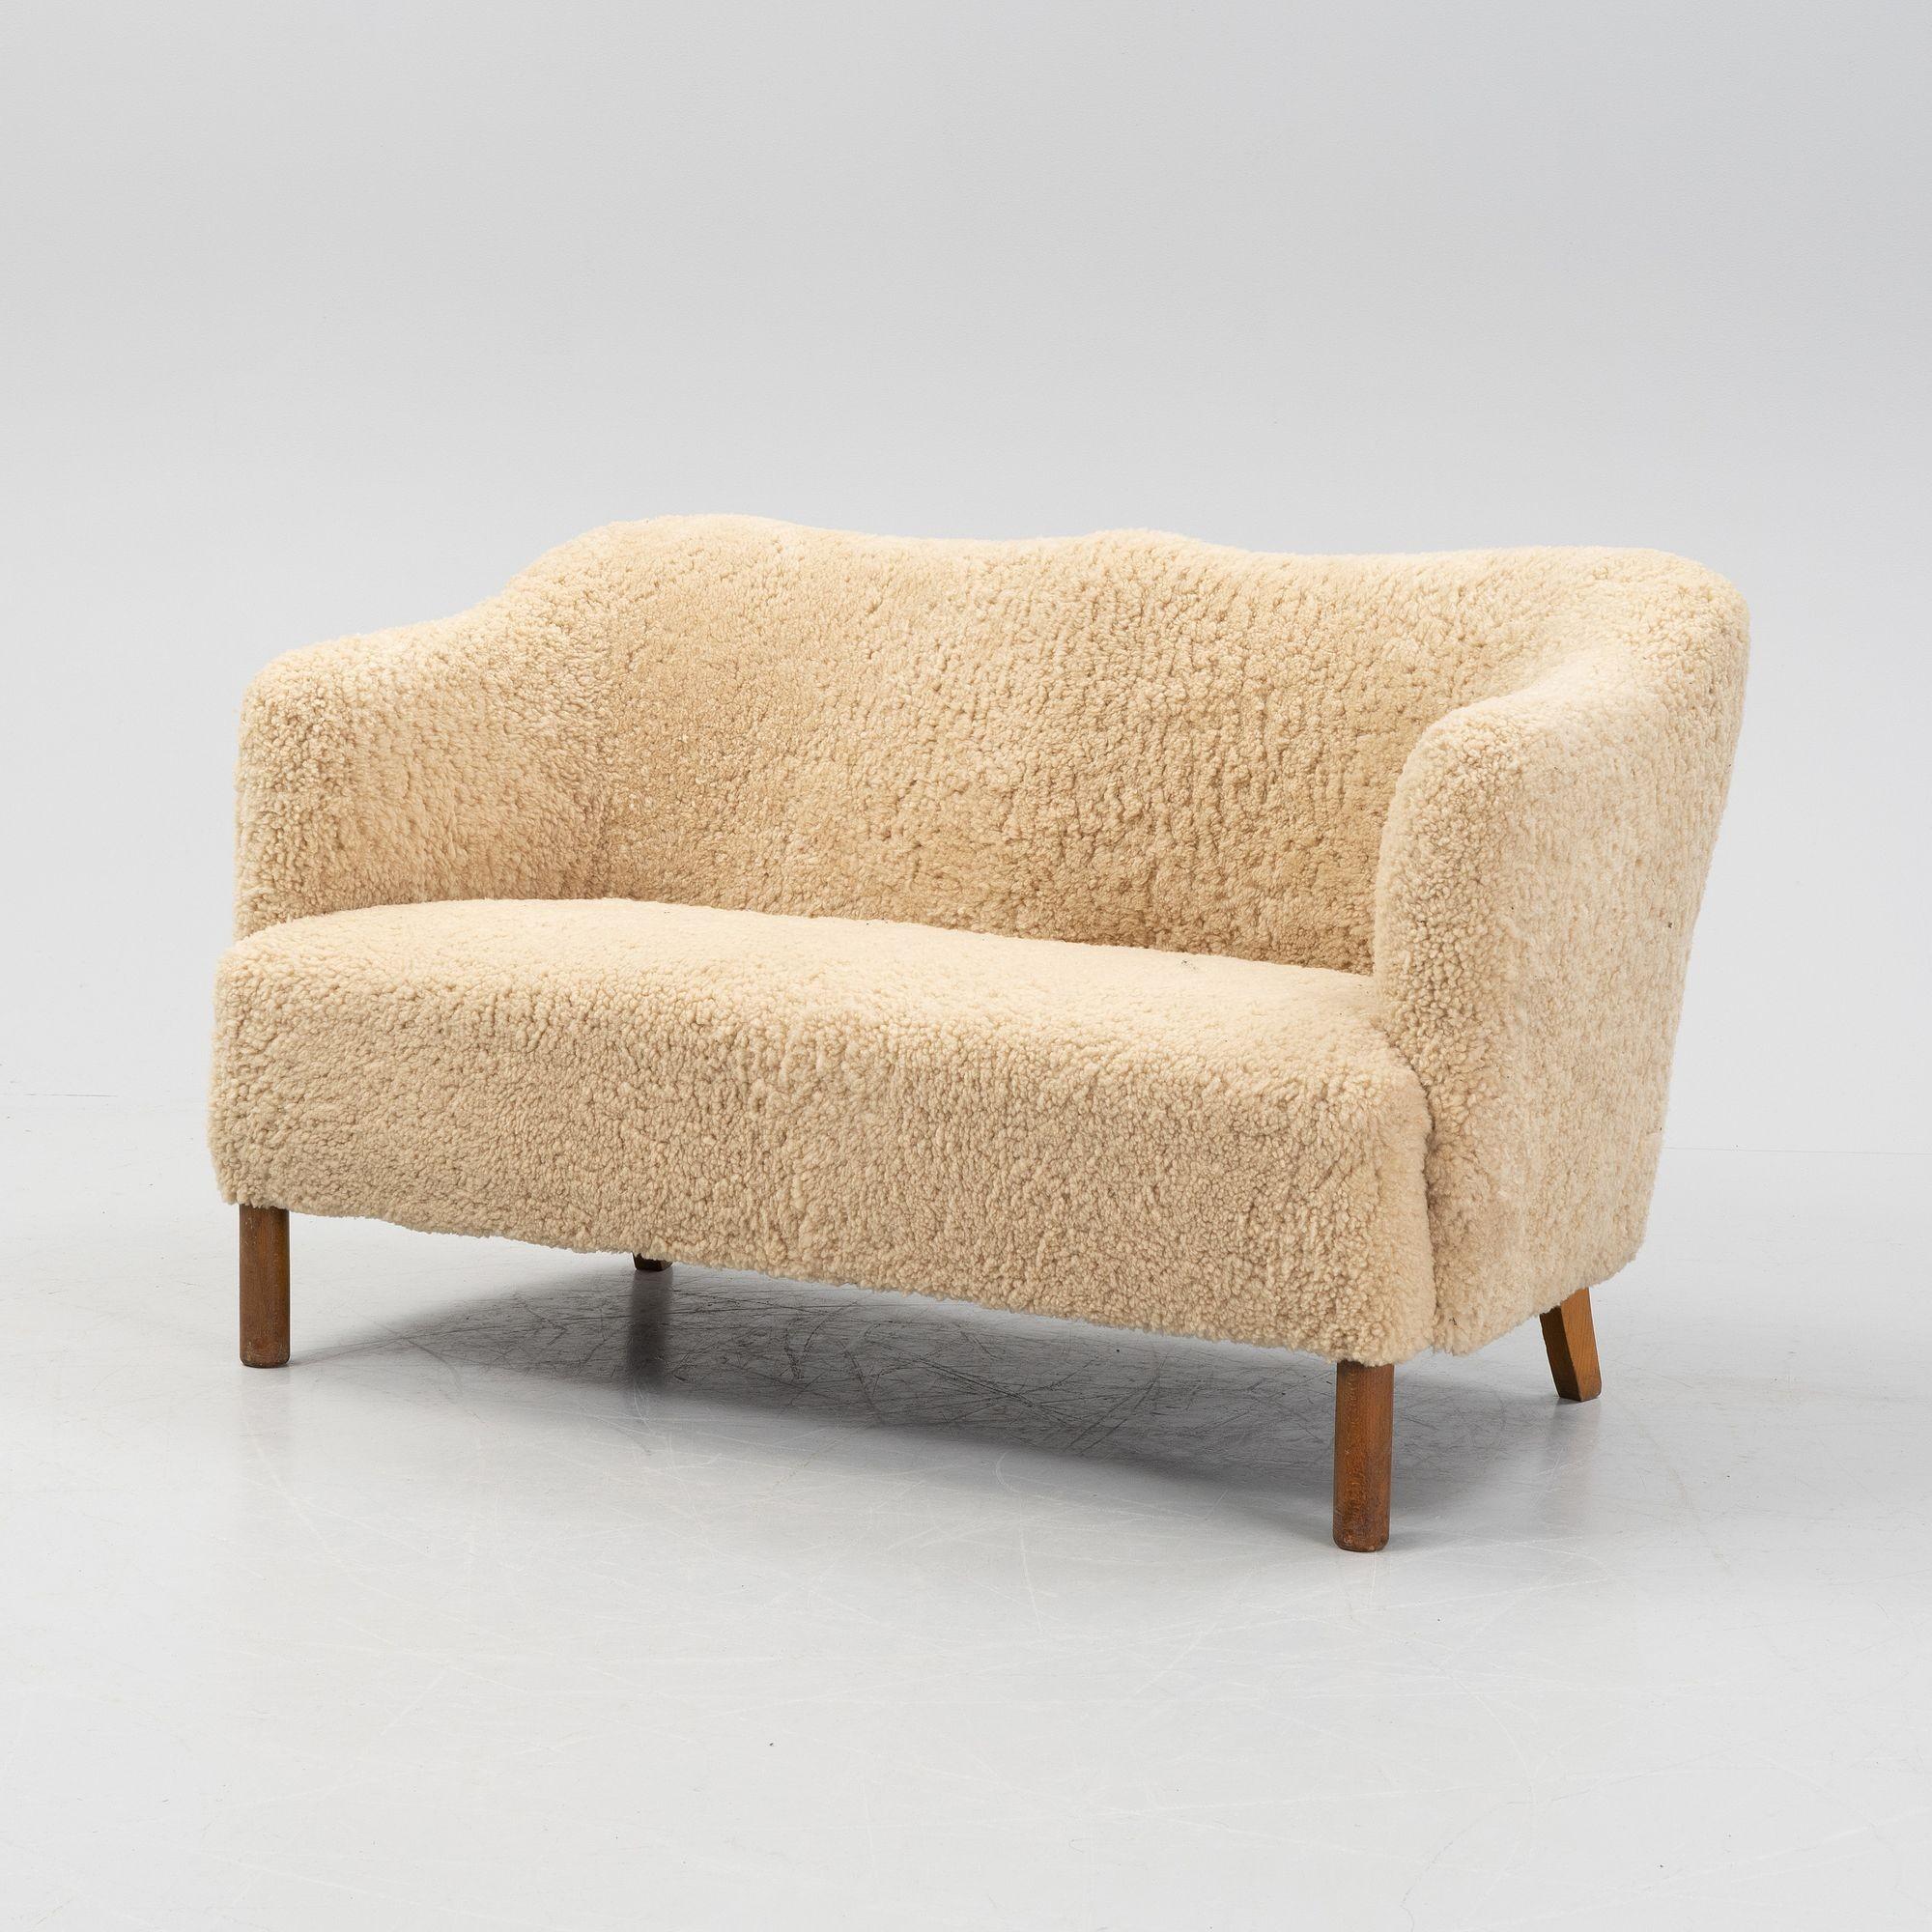 Mid-Century Modern Danish cabinet marker two-seater sofa, sheepskin, beech, Denmark, 1950s.
 
Wonderful two seater Danish modernist settee in the style of Borge Mogensen. This sofa is finished in a later genuine sheepskin upholstery; the back has